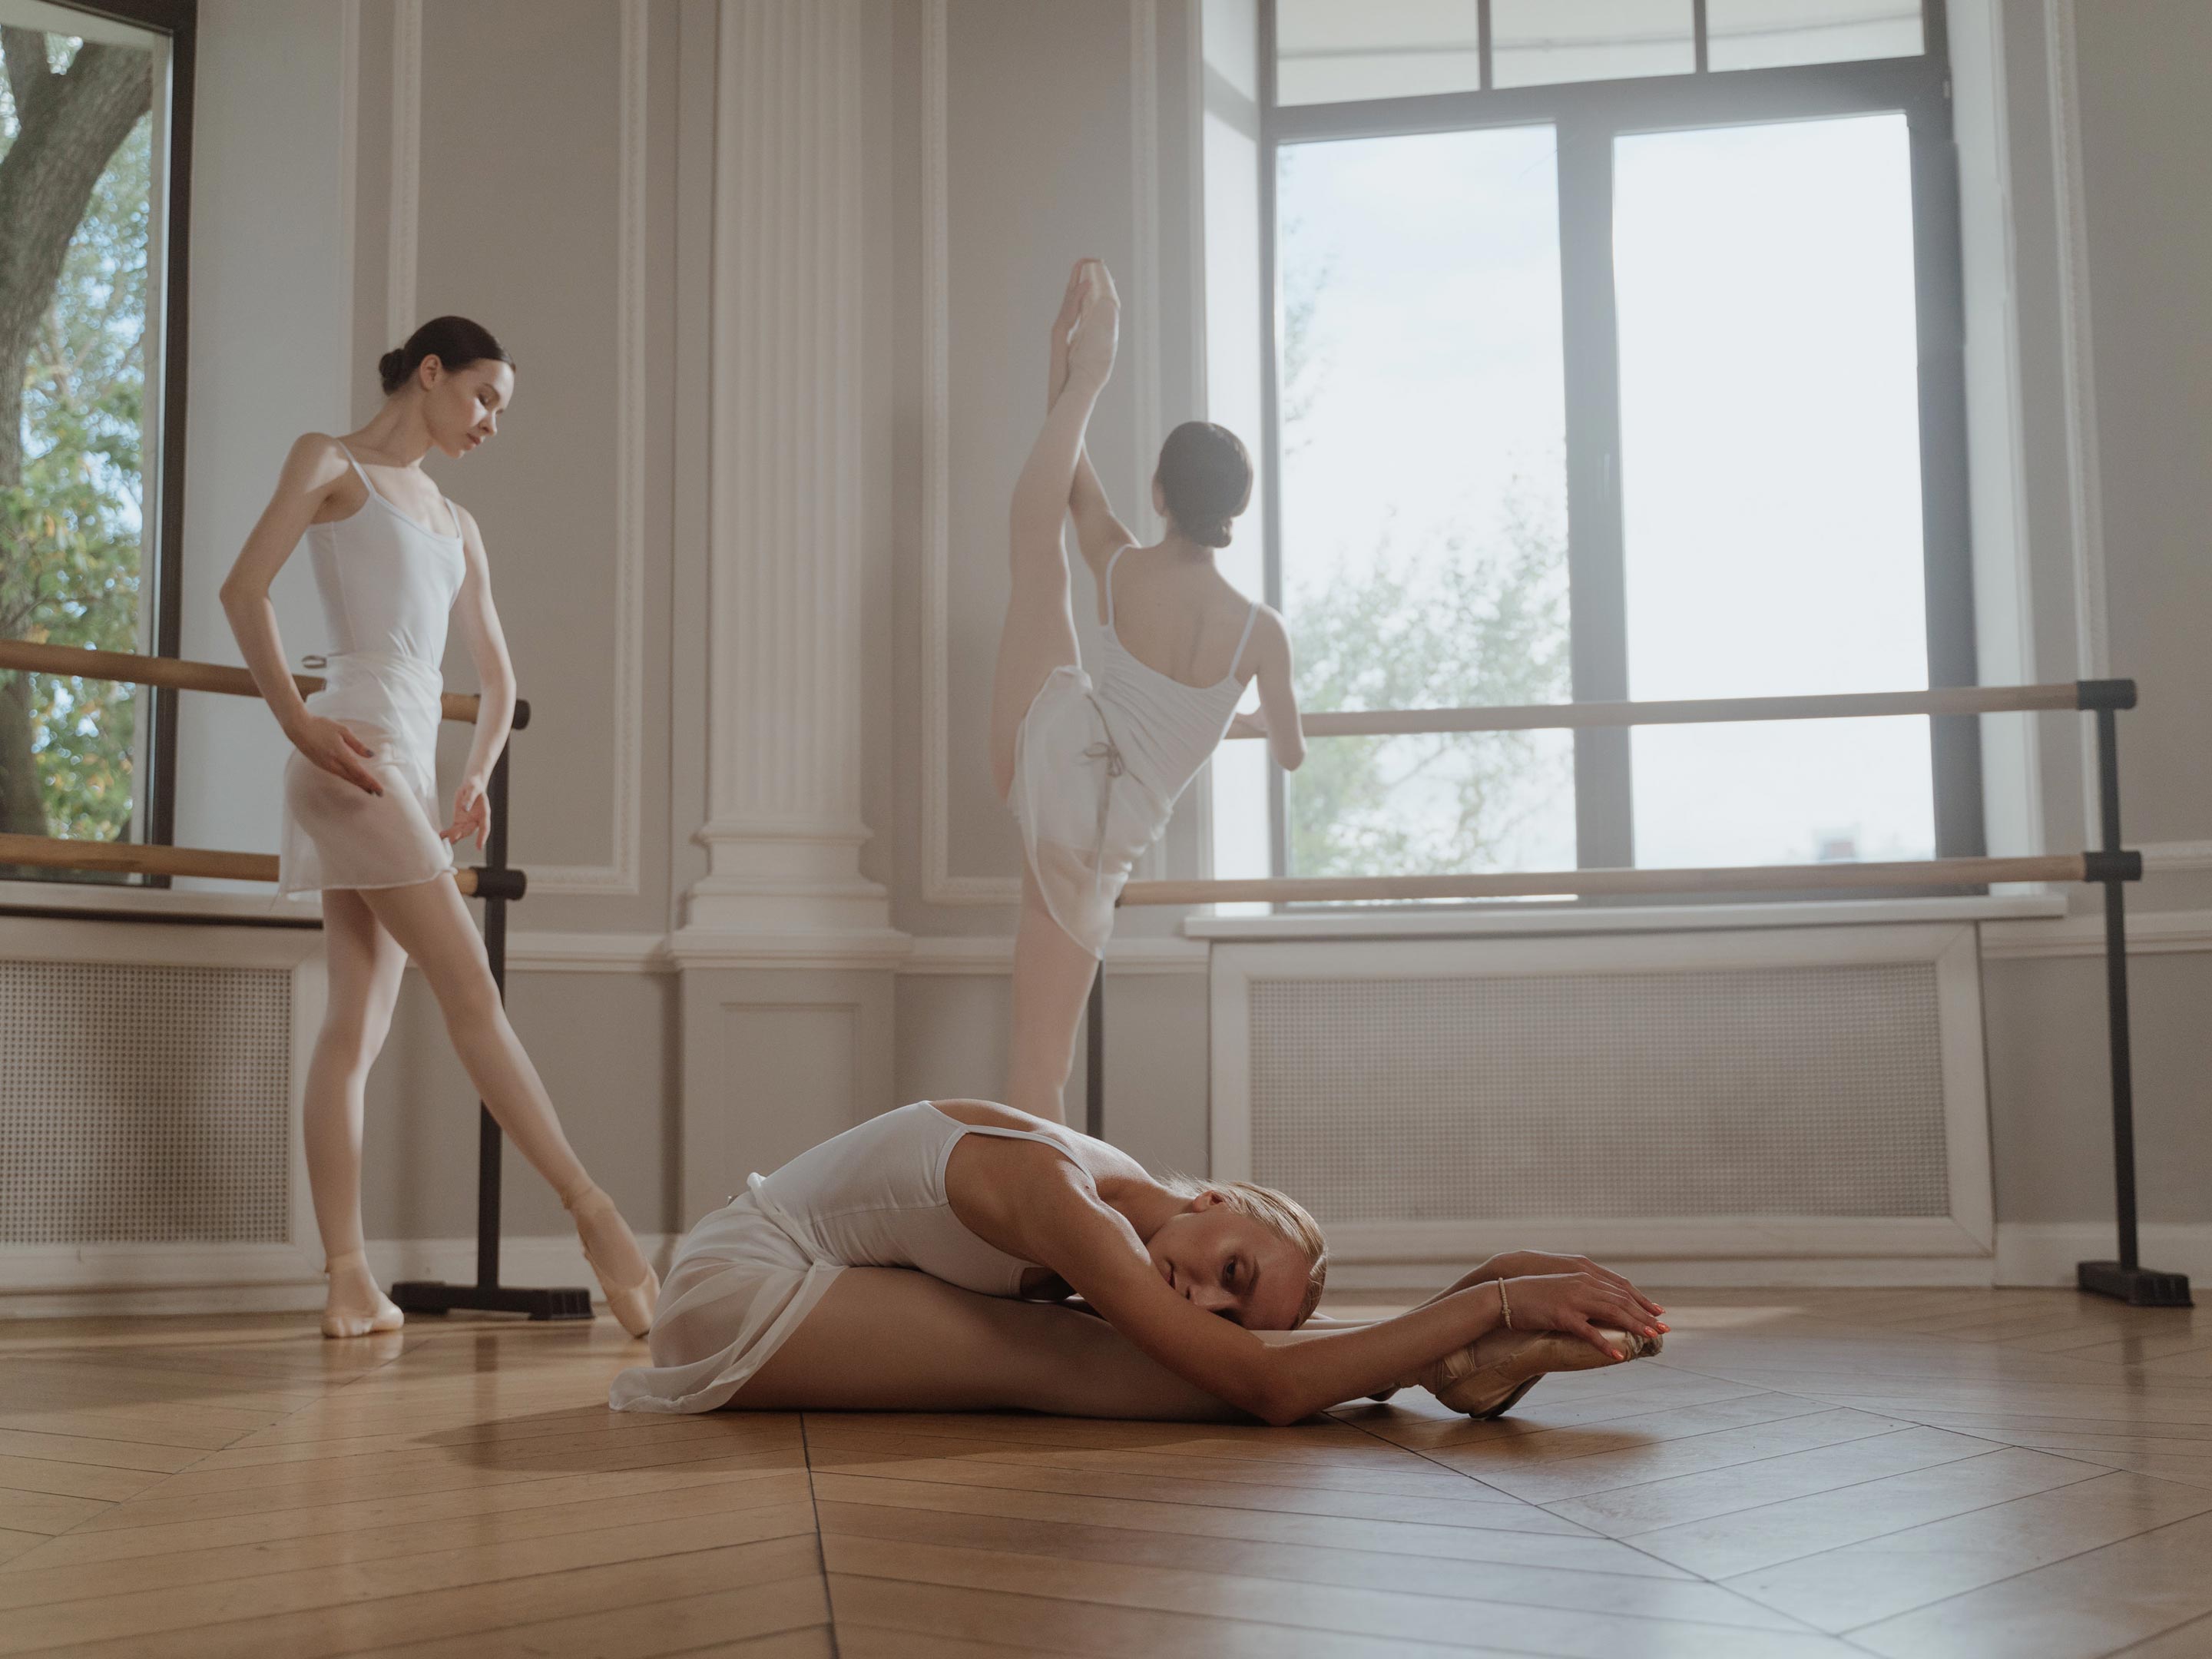 Tips to deal with stress as a ballet dancer